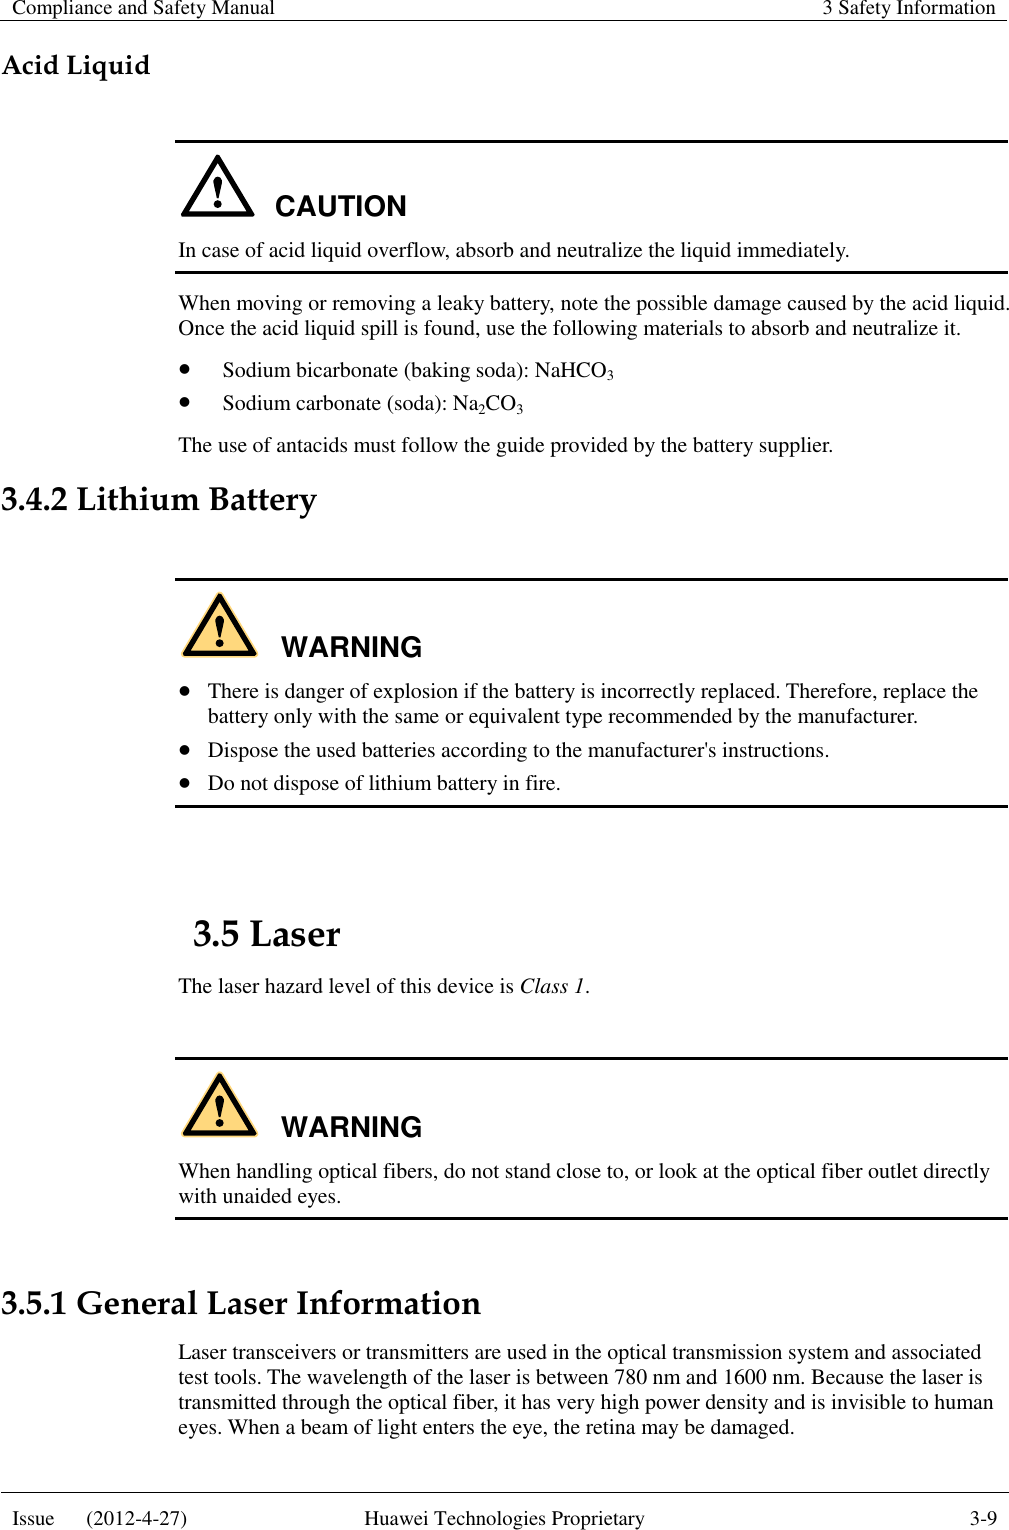 Compliance and Safety Manual 3 Safety Information  Issue      (2012-4-27) Huawei Technologies Proprietary 3-9  Acid Liquid  CAUTION In case of acid liquid overflow, absorb and neutralize the liquid immediately. When moving or removing a leaky battery, note the possible damage caused by the acid liquid. Once the acid liquid spill is found, use the following materials to absorb and neutralize it.  Sodium bicarbonate (baking soda): NaHCO3  Sodium carbonate (soda): Na2CO3 The use of antacids must follow the guide provided by the battery supplier. 3.4.2 Lithium Battery  WARNING  There is danger of explosion if the battery is incorrectly replaced. Therefore, replace the battery only with the same or equivalent type recommended by the manufacturer.  Dispose the used batteries according to the manufacturer&apos;s instructions.  Do not dispose of lithium battery in fire.  3.5 Laser The laser hazard level of this device is Class 1.  WARNING When handling optical fibers, do not stand close to, or look at the optical fiber outlet directly with unaided eyes.  3.5.1 General Laser Information Laser transceivers or transmitters are used in the optical transmission system and associated test tools. The wavelength of the laser is between 780 nm and 1600 nm. Because the laser is transmitted through the optical fiber, it has very high power density and is invisible to human eyes. When a beam of light enters the eye, the retina may be damaged. 